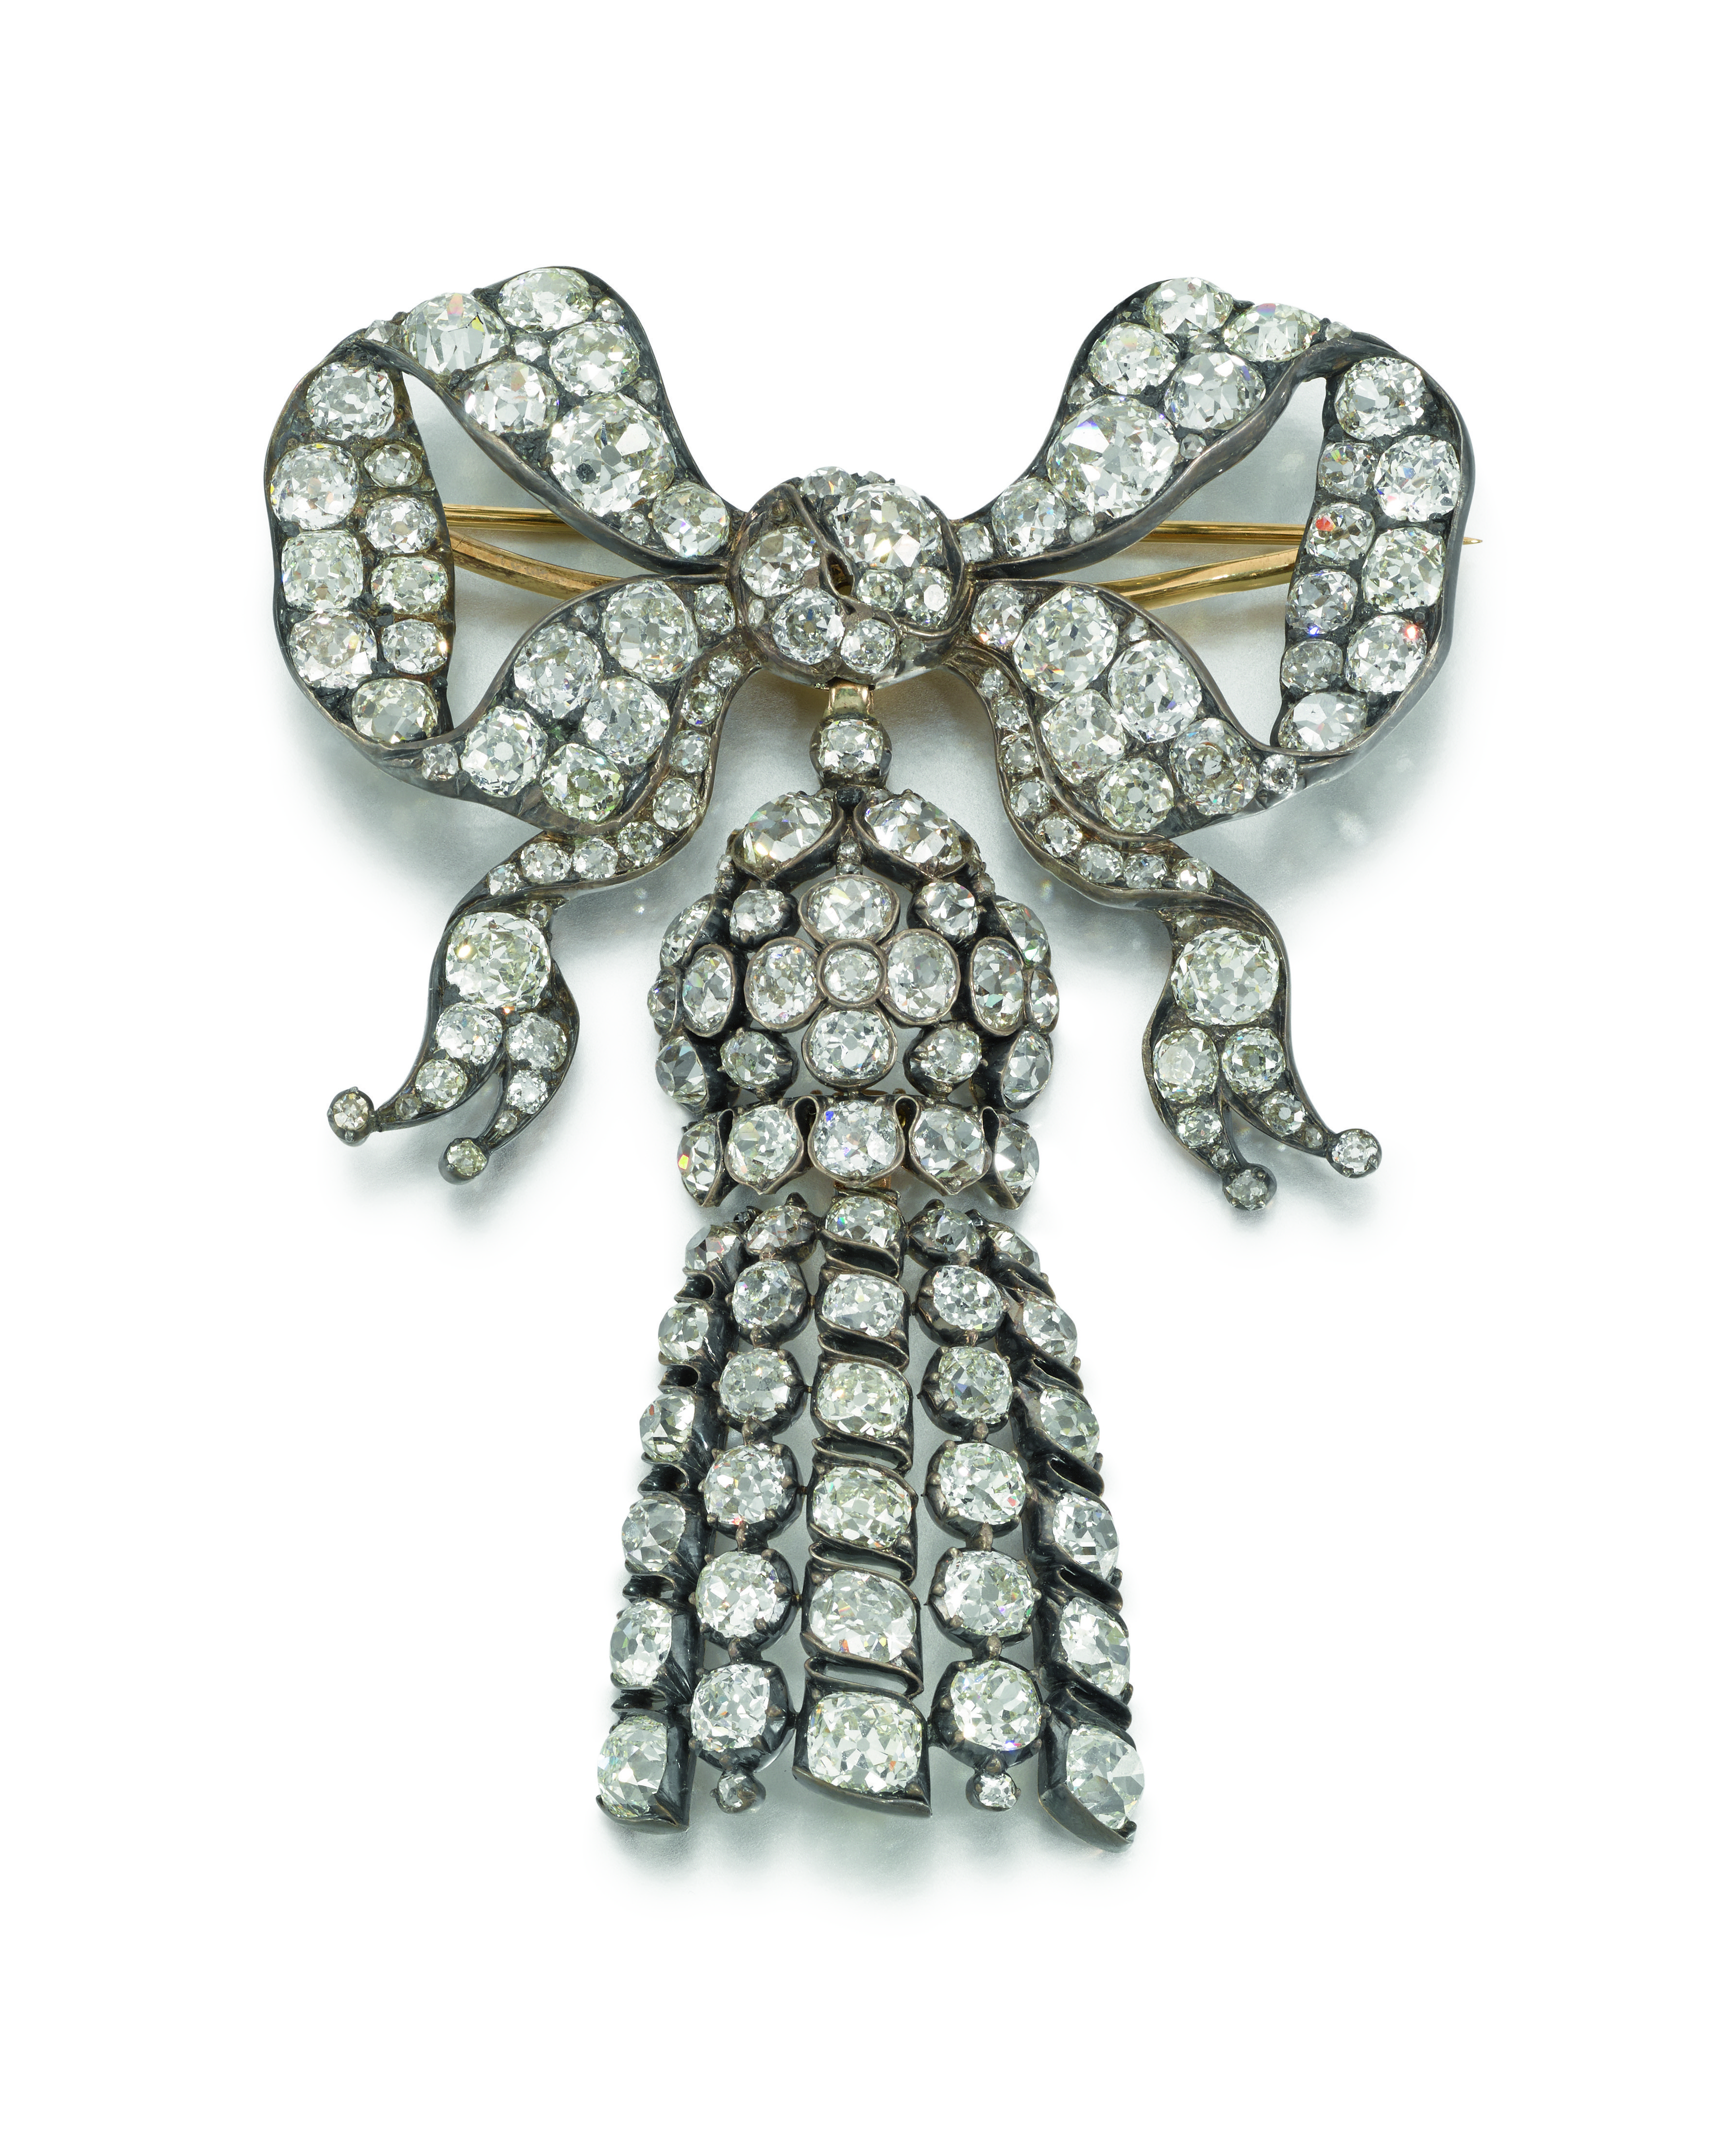 The diamond bow brooch could fetch up to £35,000 (Sotheby's)